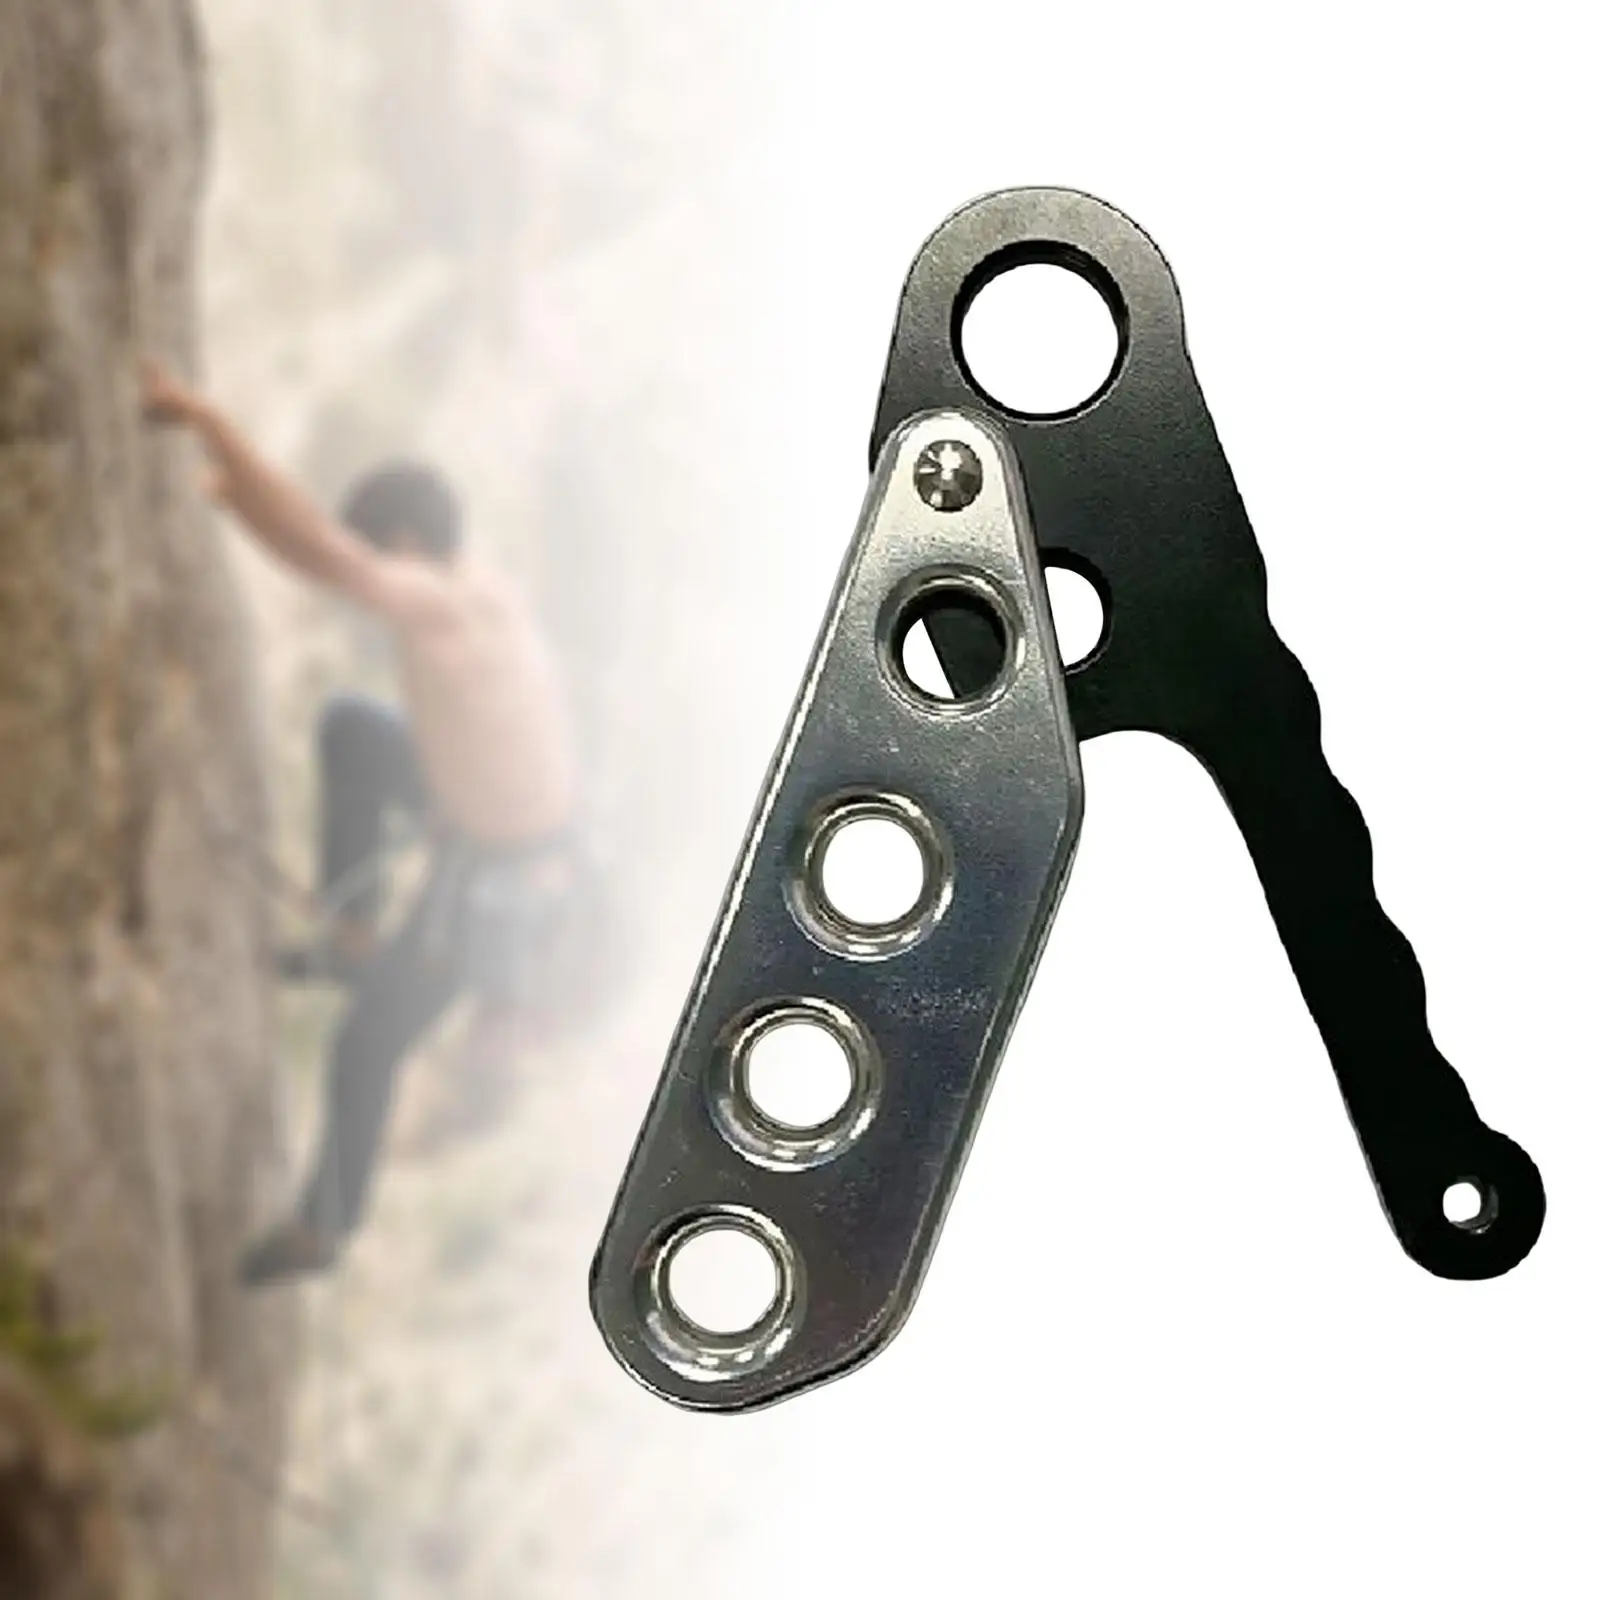 Rock Climbing Descender Fall Protection High Strength Belaying for